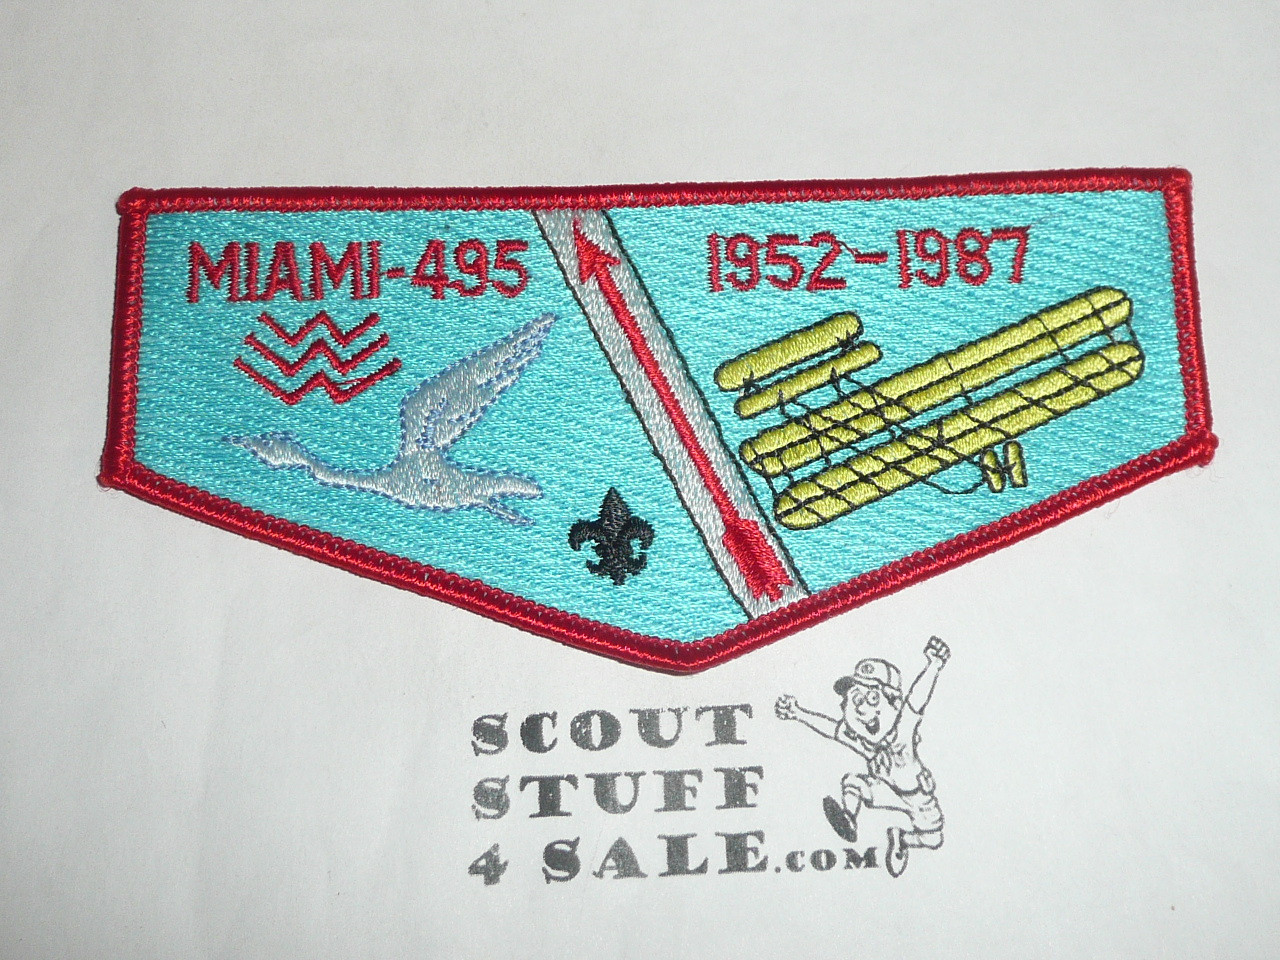 Order of the Arrow Lodge #495 Miami s5 35th Anniversary Flap Patch